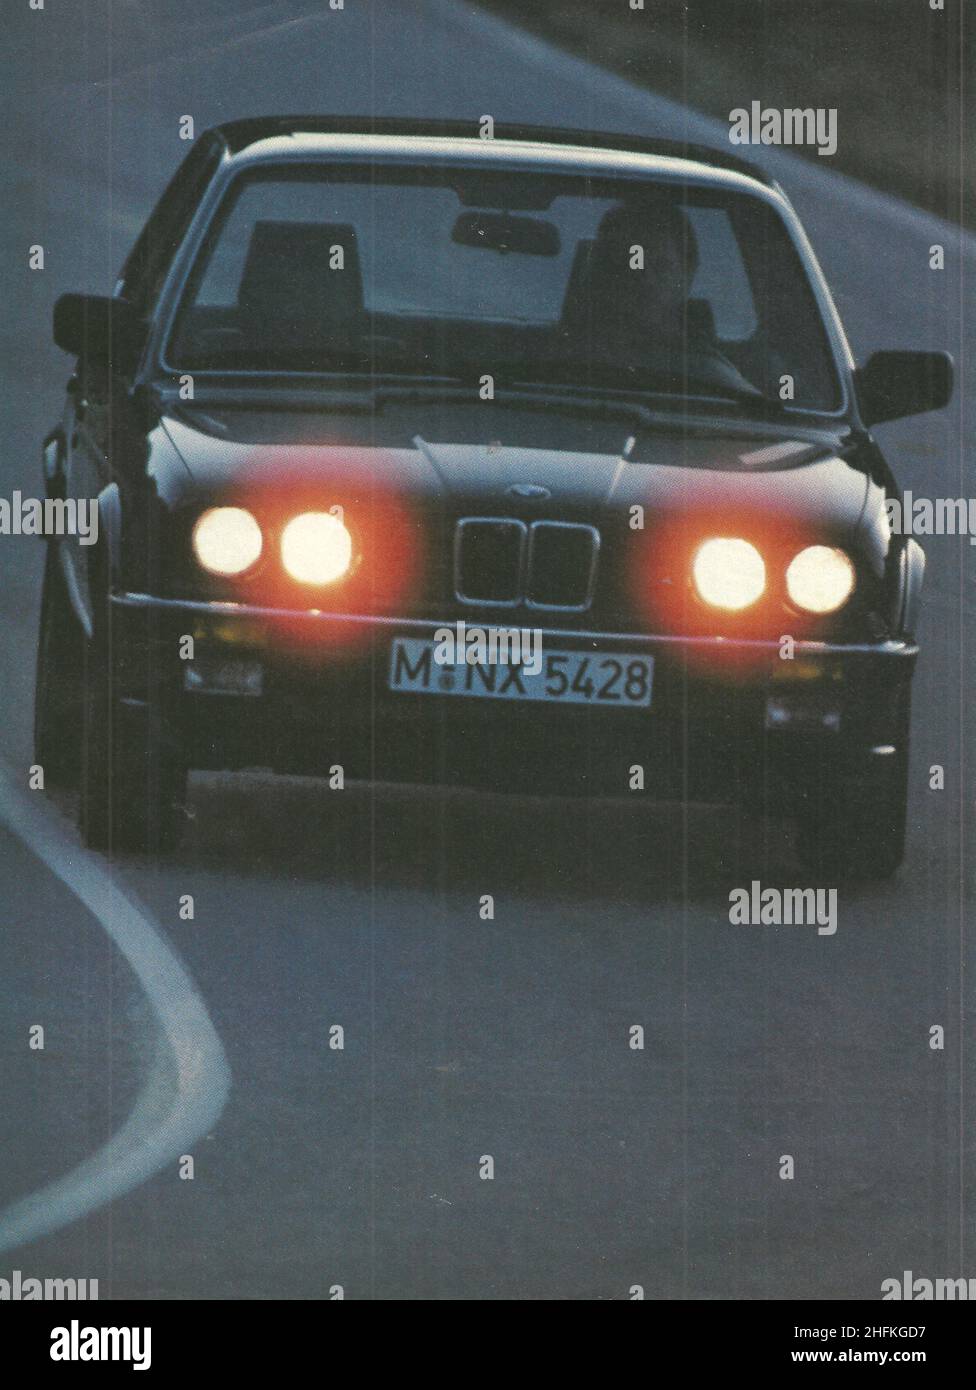 Vintage advertisement paper ad of BMW cars Stock Photo